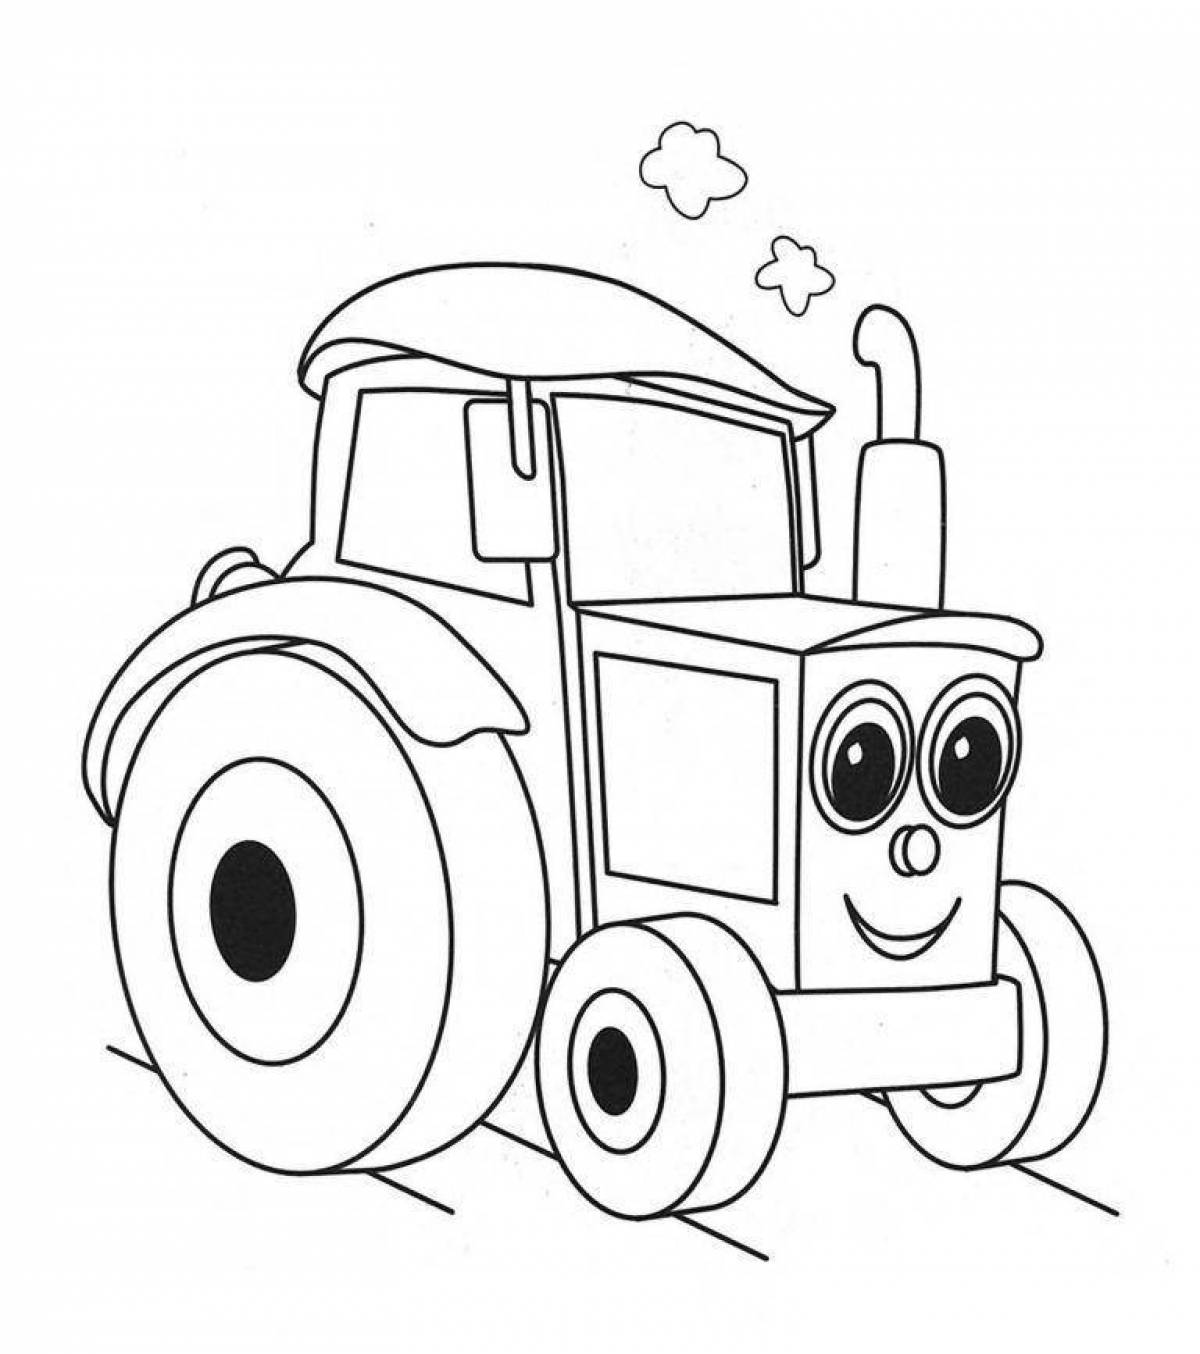 Coloring pages magic cars for boys 3-4 years old